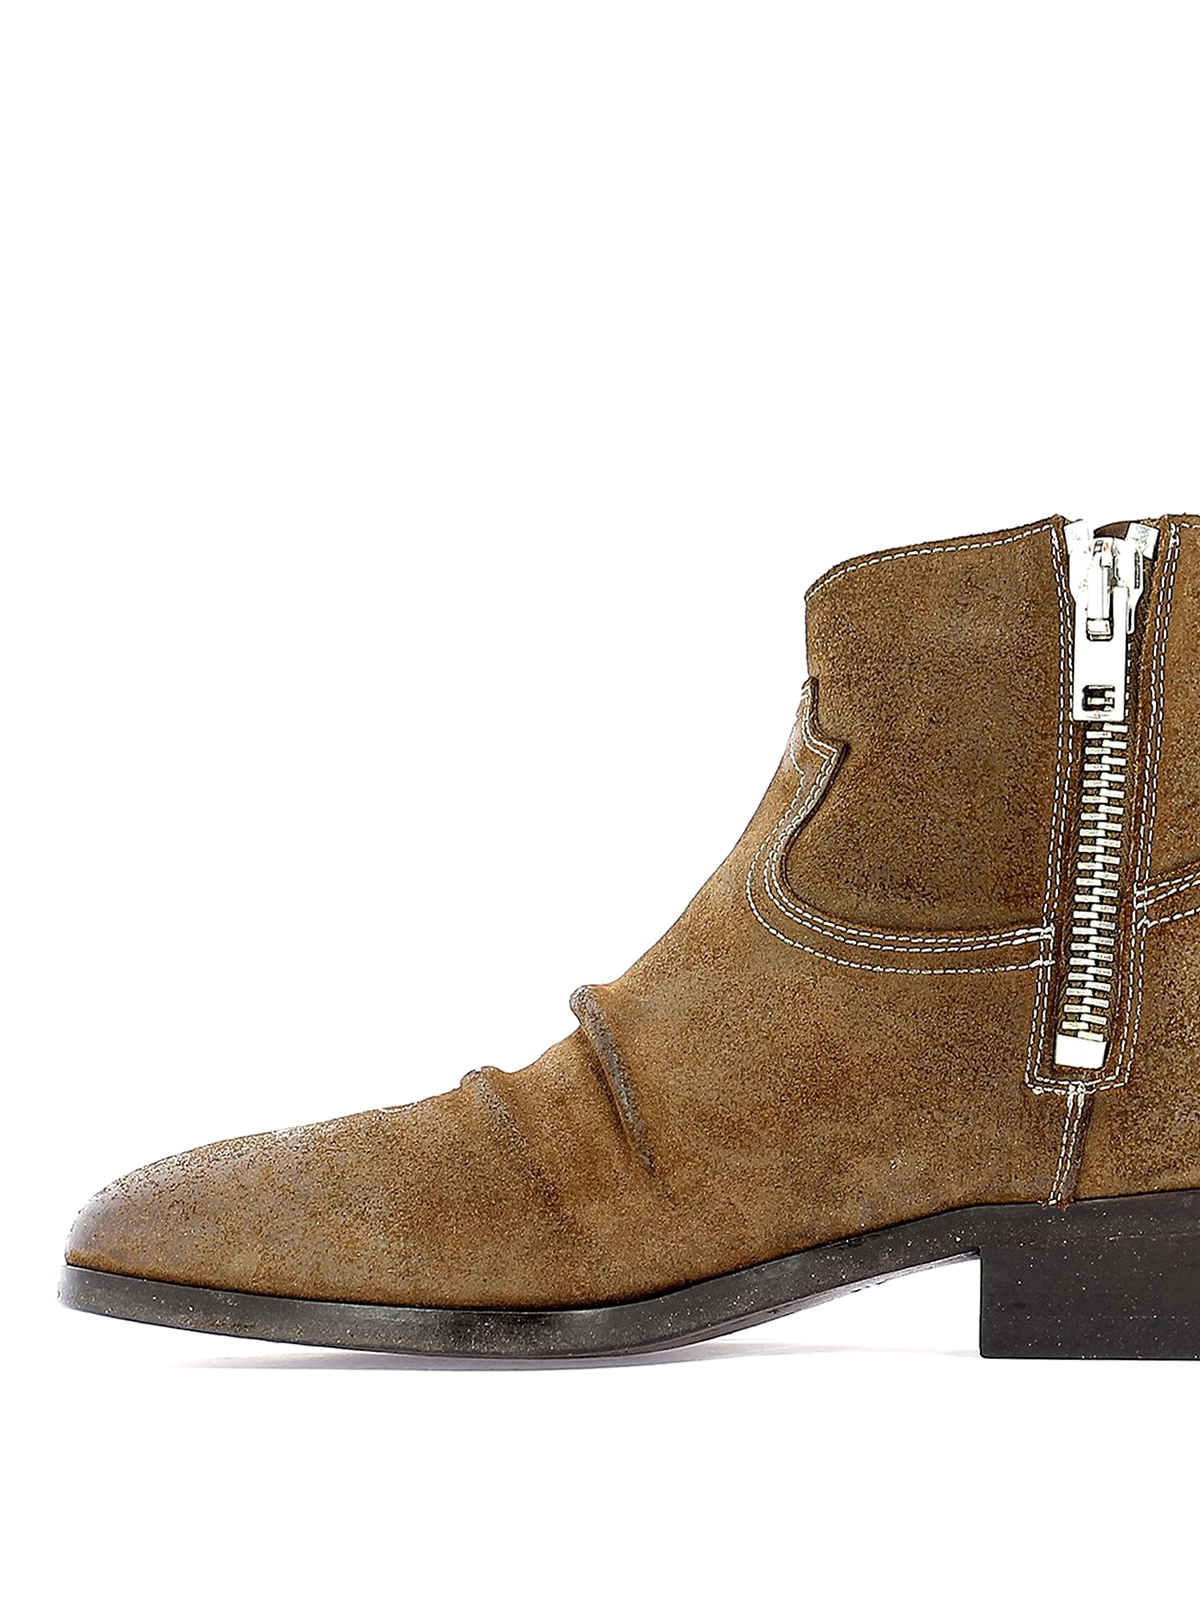 golden goose ankle boots sale